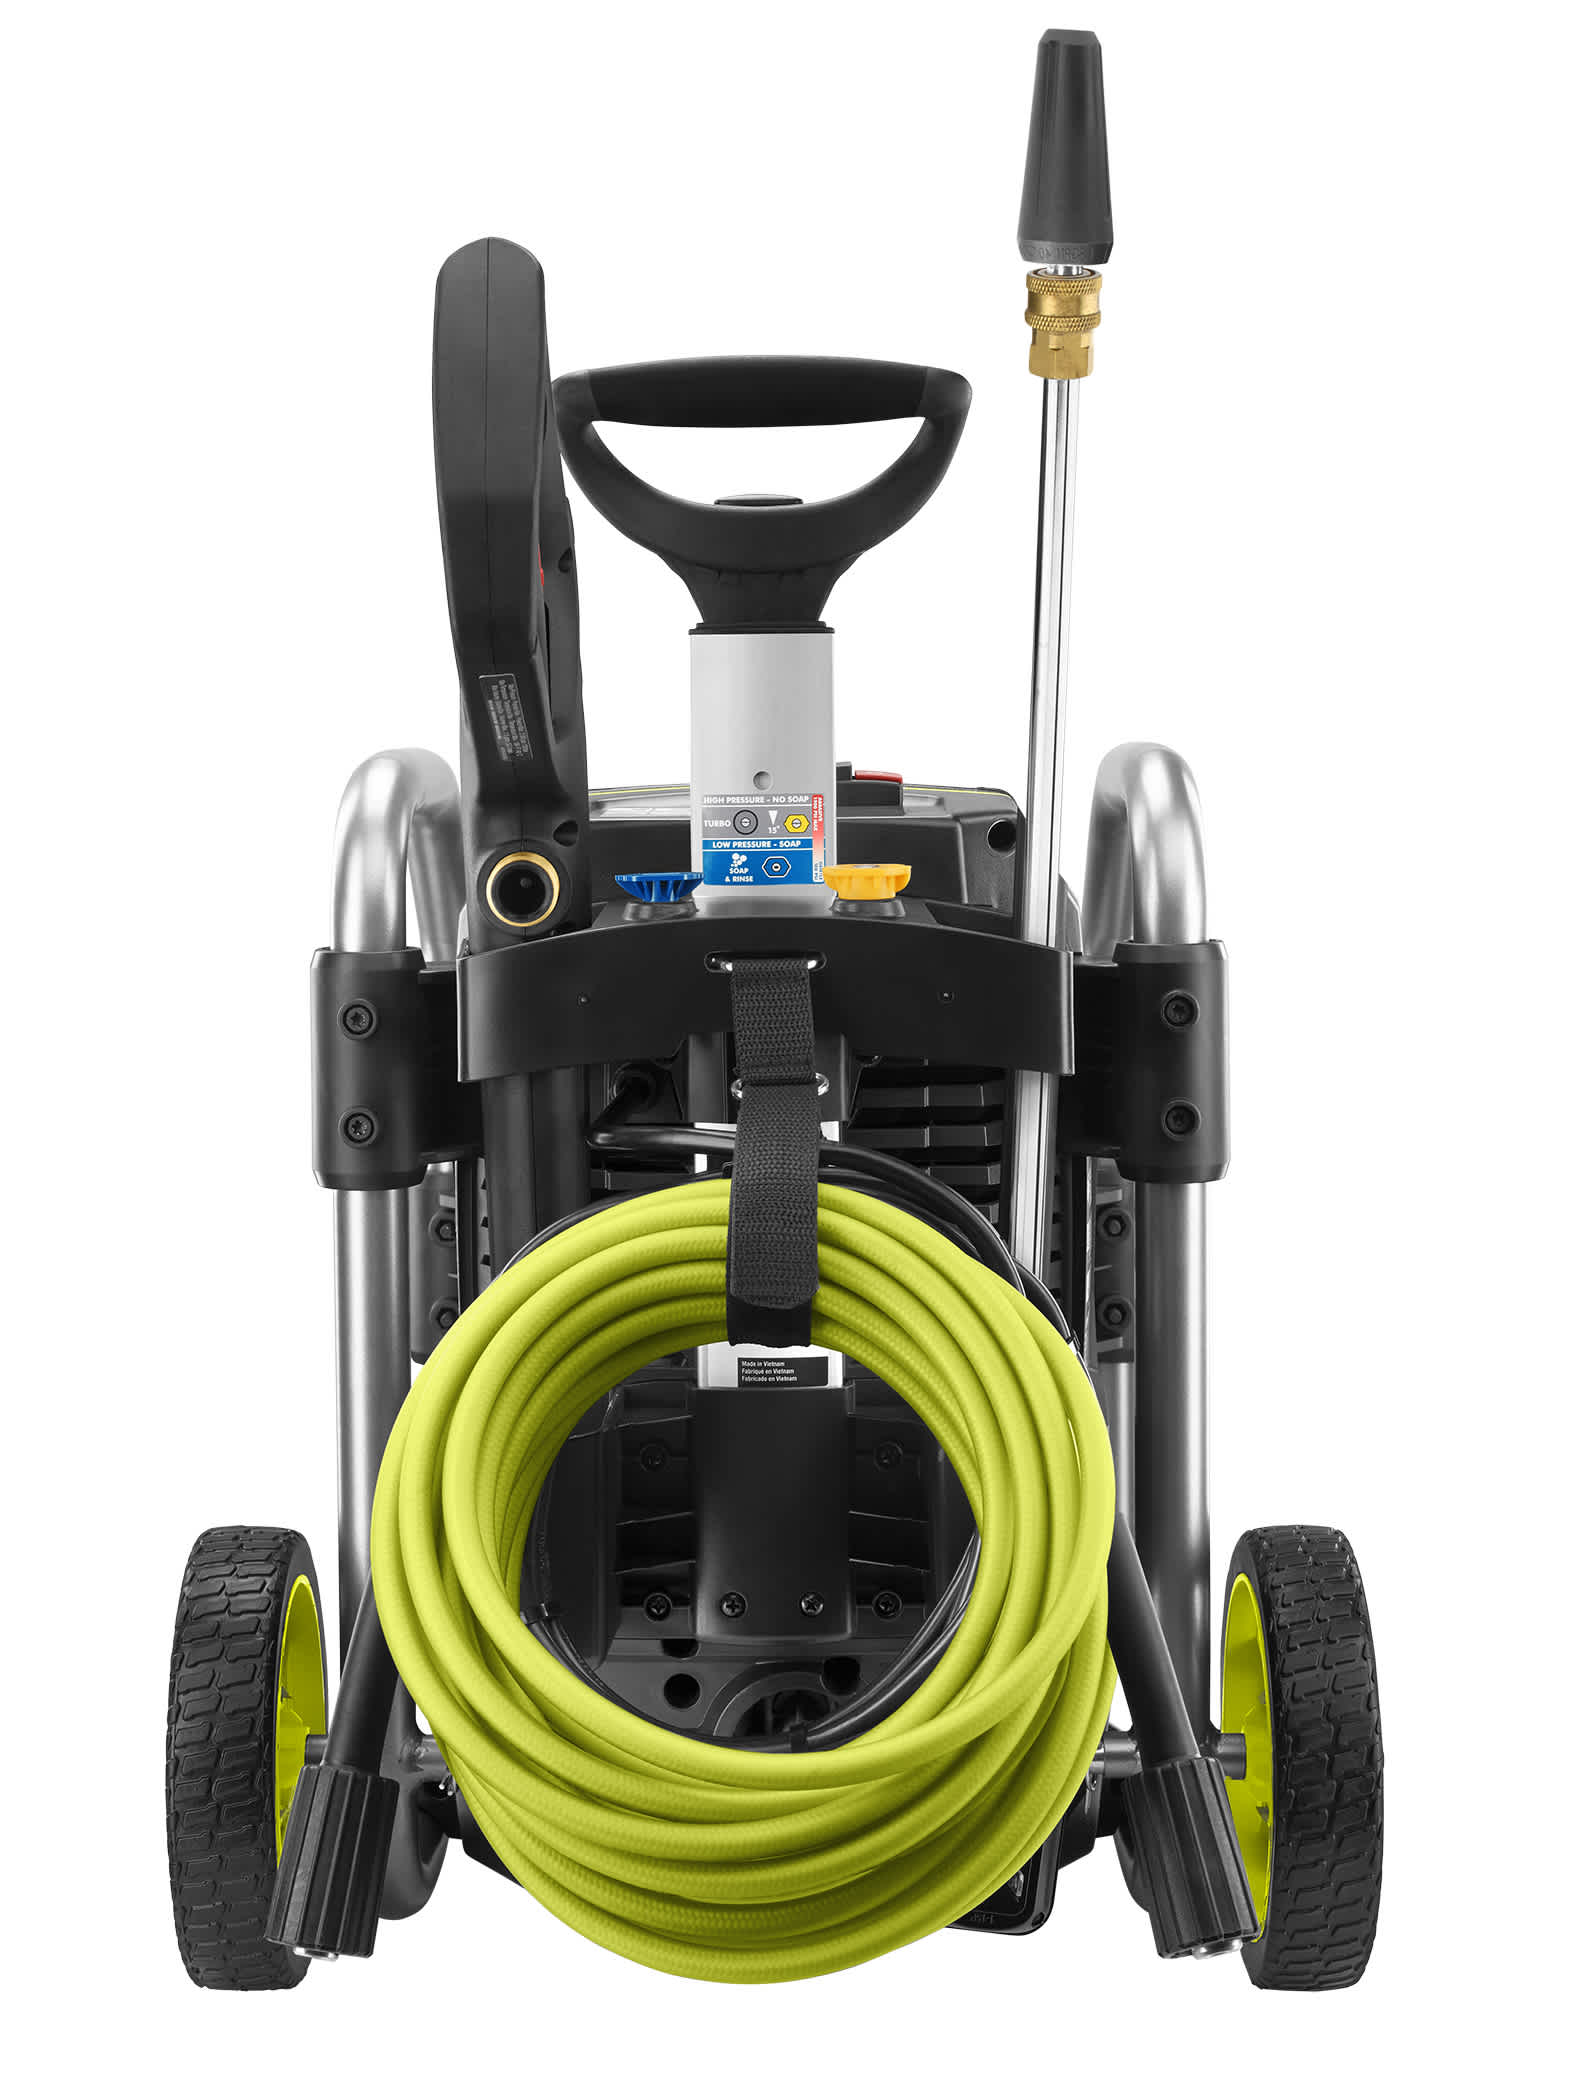 Product Features Image for 2000 PSI 1.2 GPM COLD WATER ELECTRIC PRESSURE WASHER.